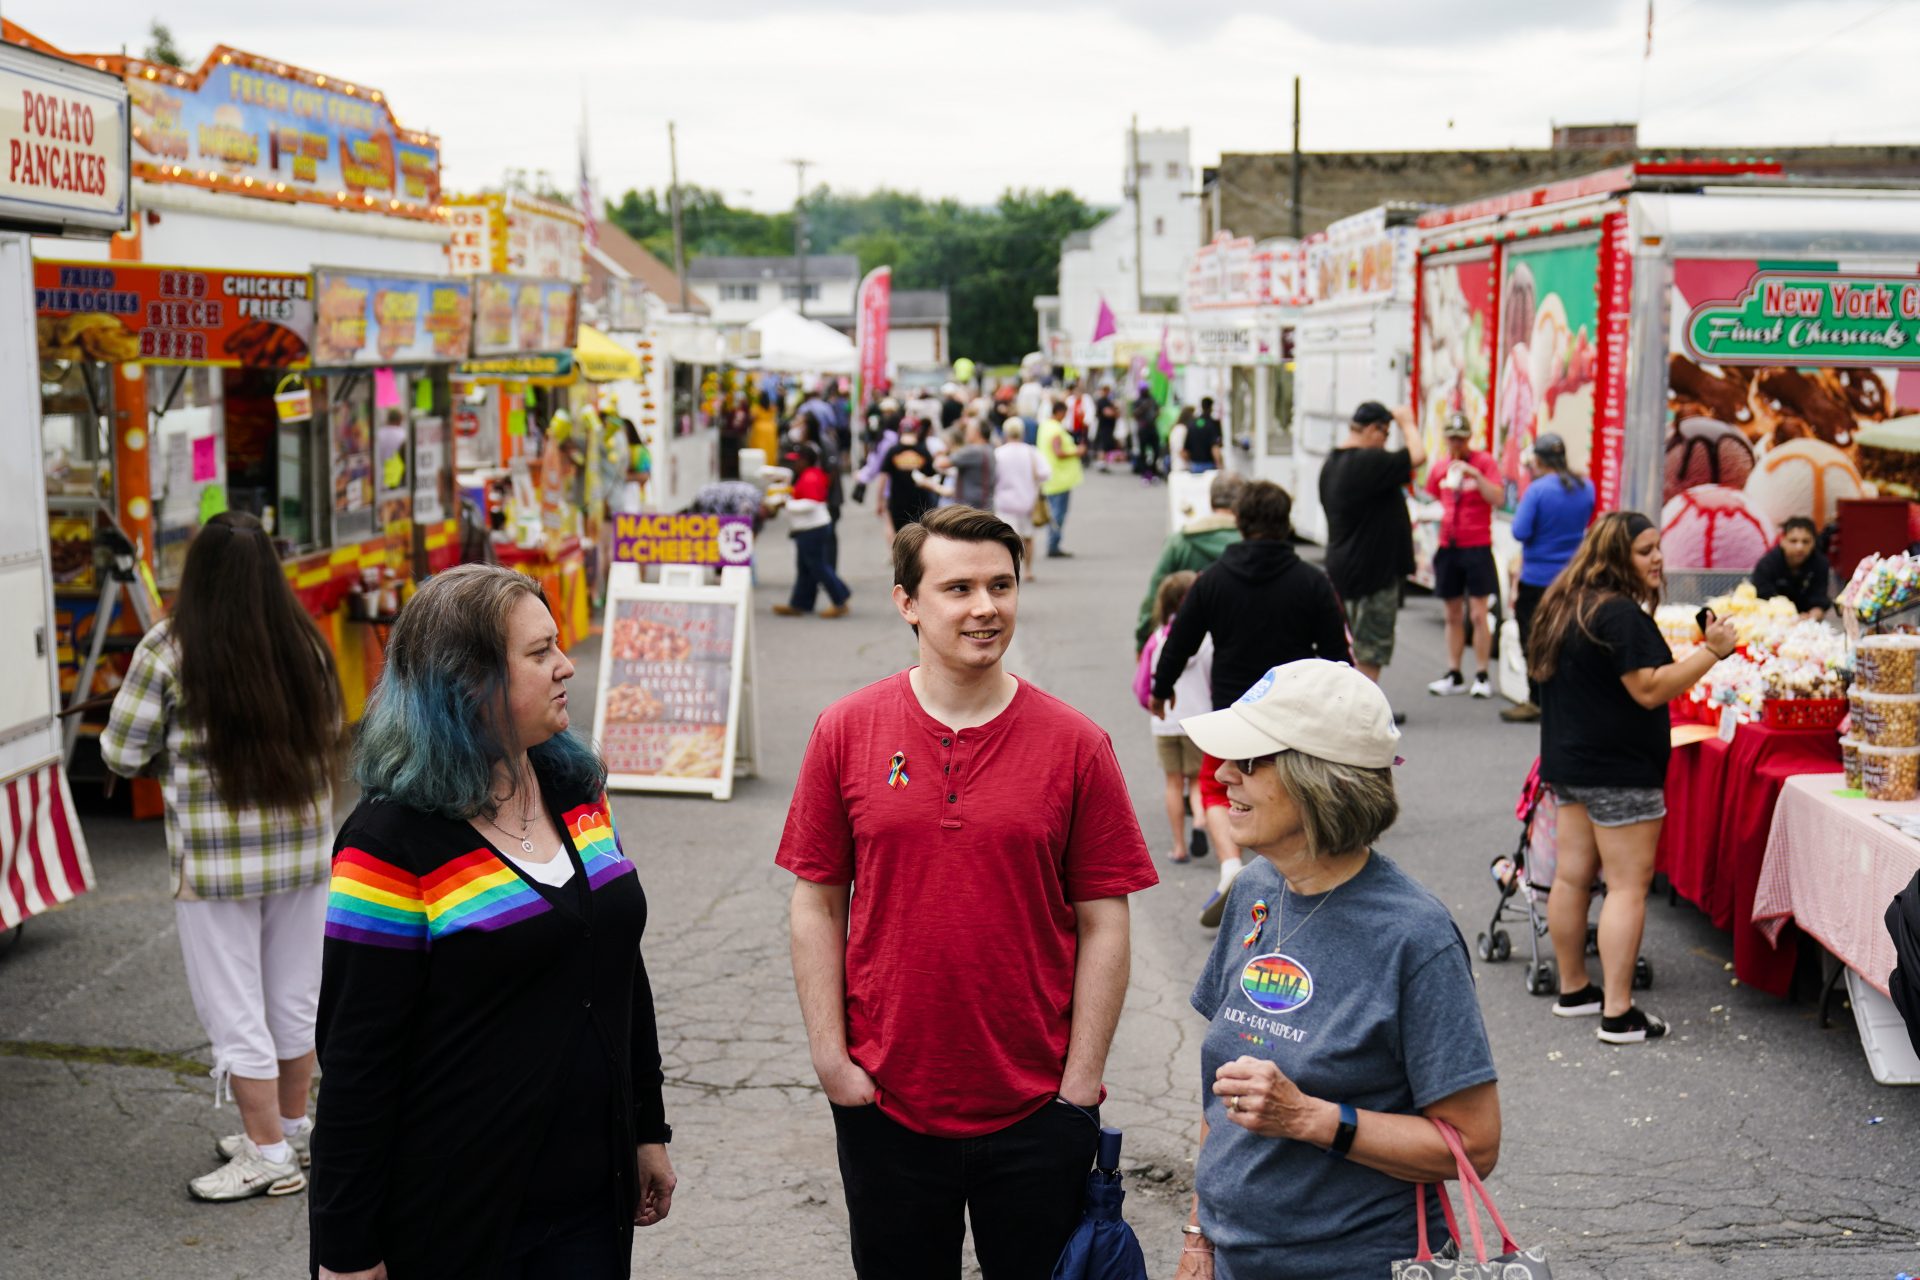 Alisha Hoffman-Mirilovich, left, Mark Shaffer, and Claudia Glennan visit with on another at the Edwardsville Pierogi Festival in Edwardsville, Pa., Friday, June 11, 2021.